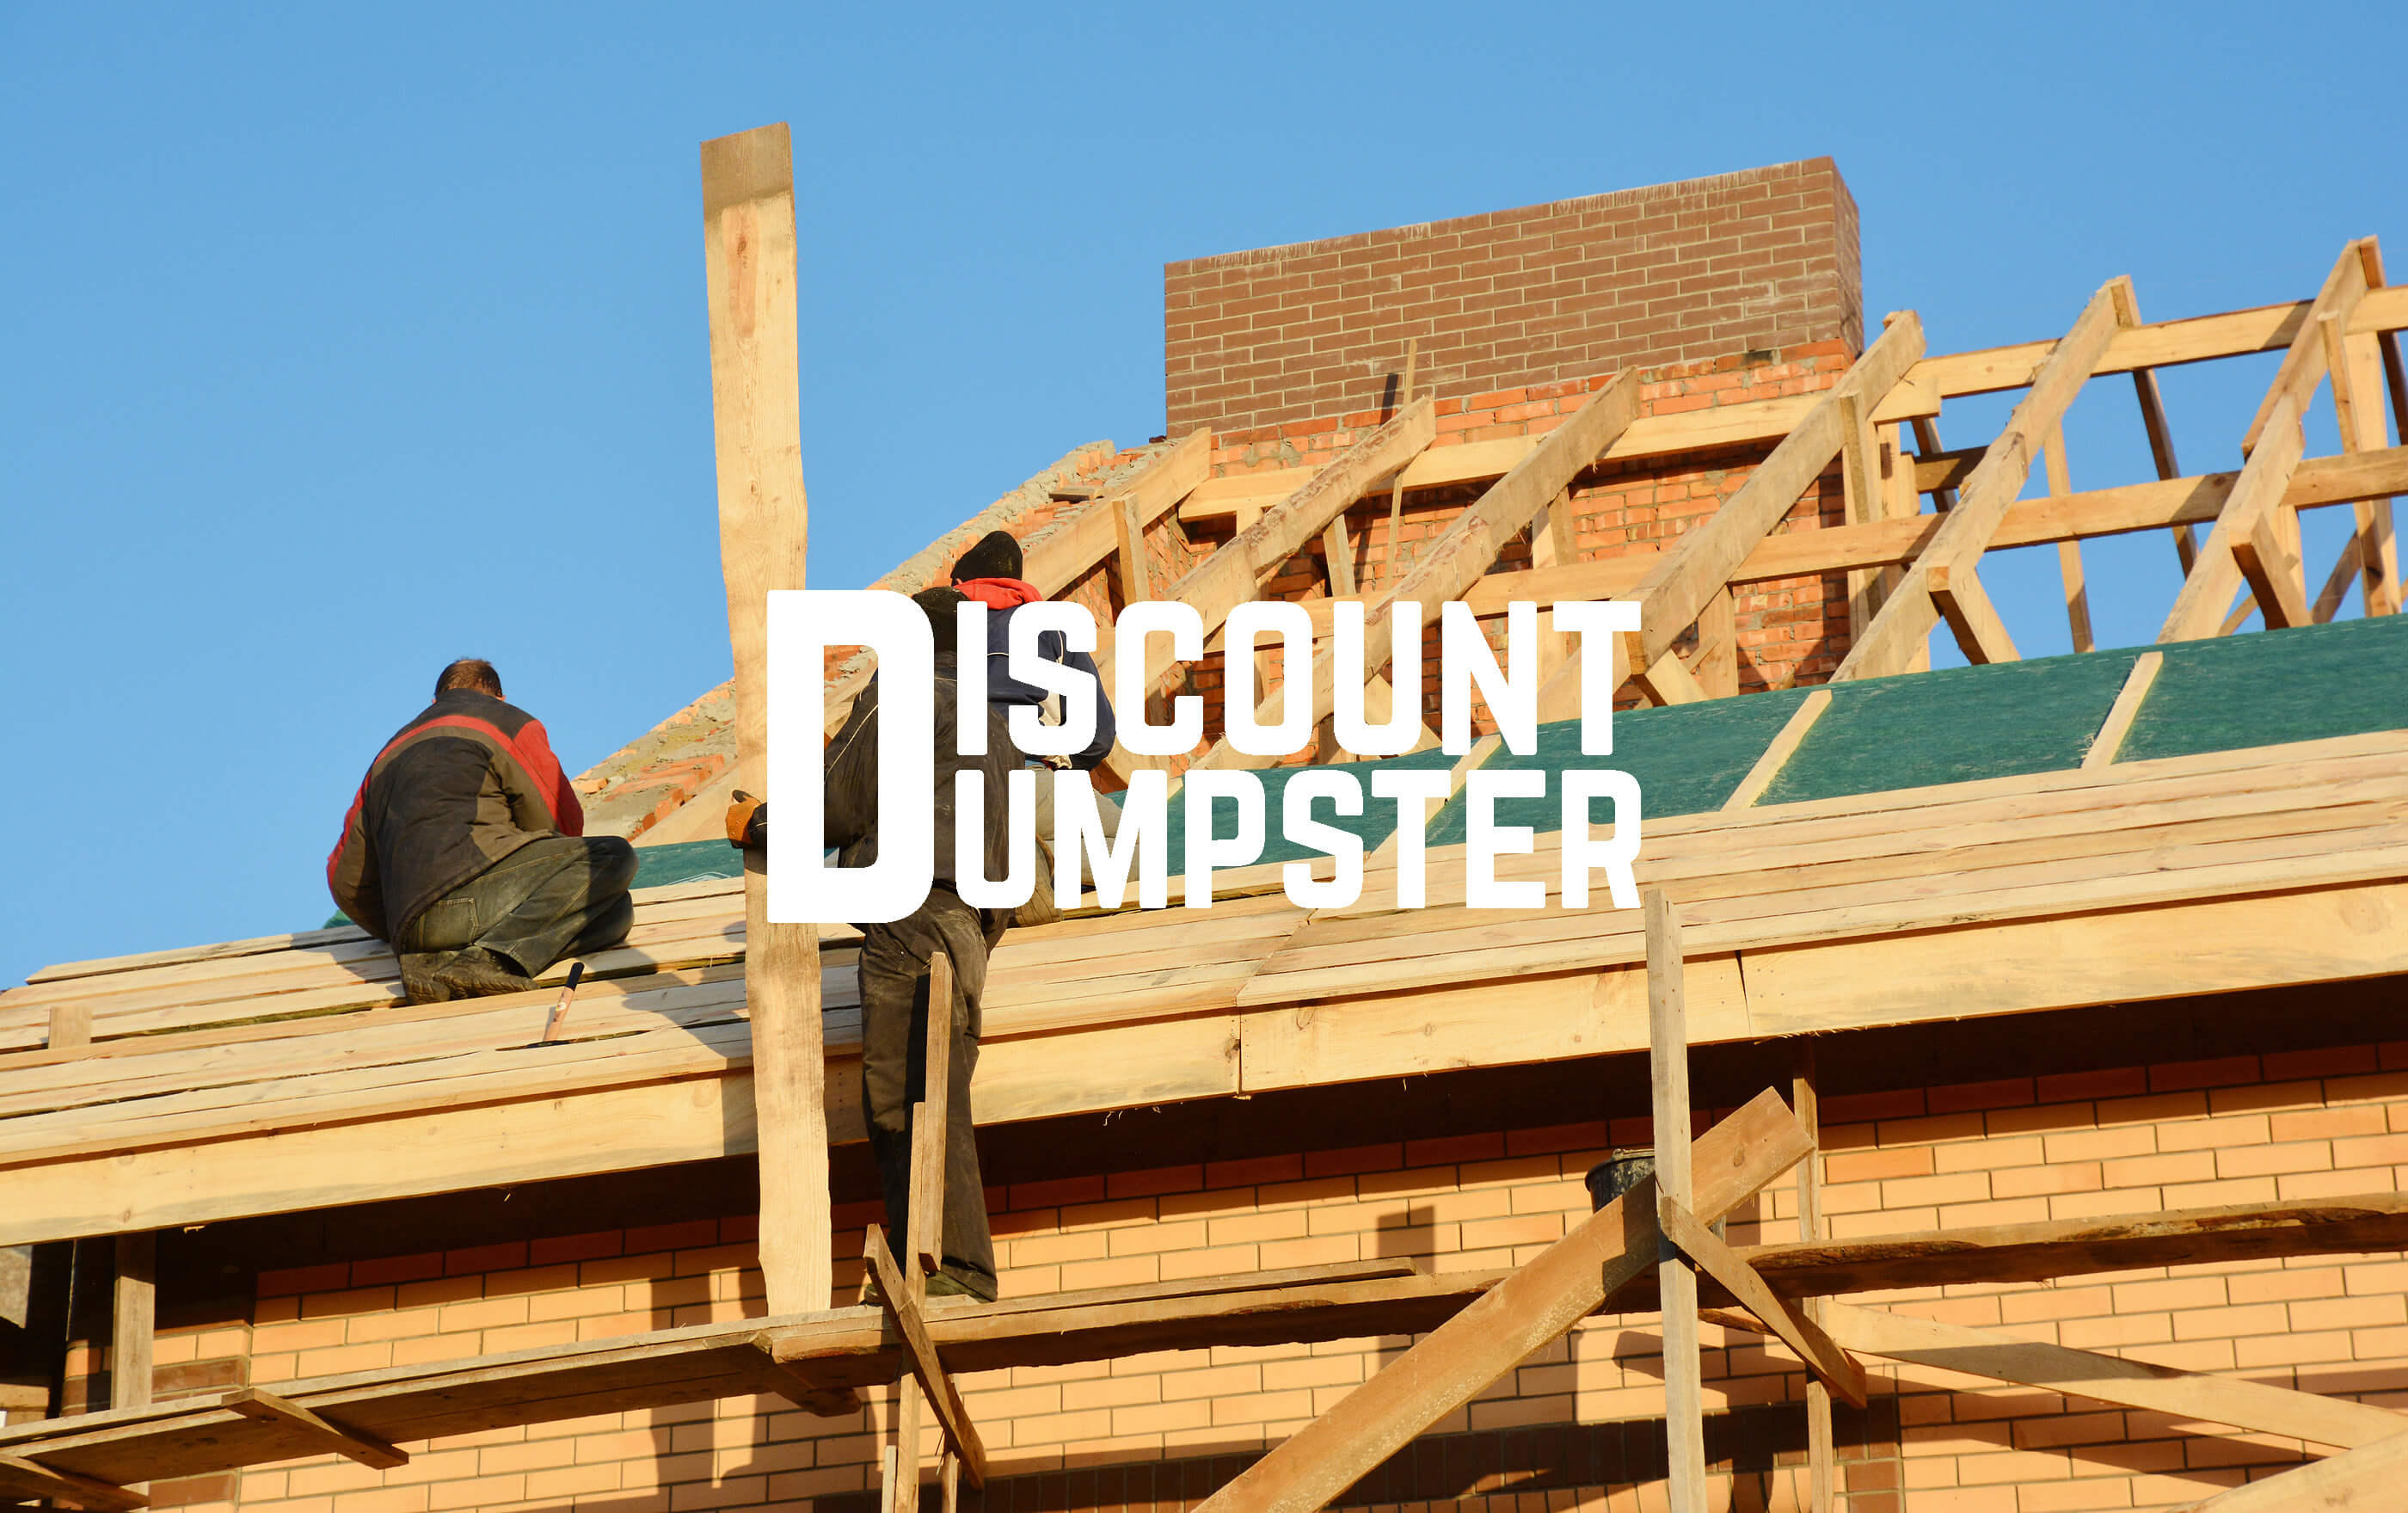 Discount dumpster removes waste from your construction or home improvement site in Chicago il